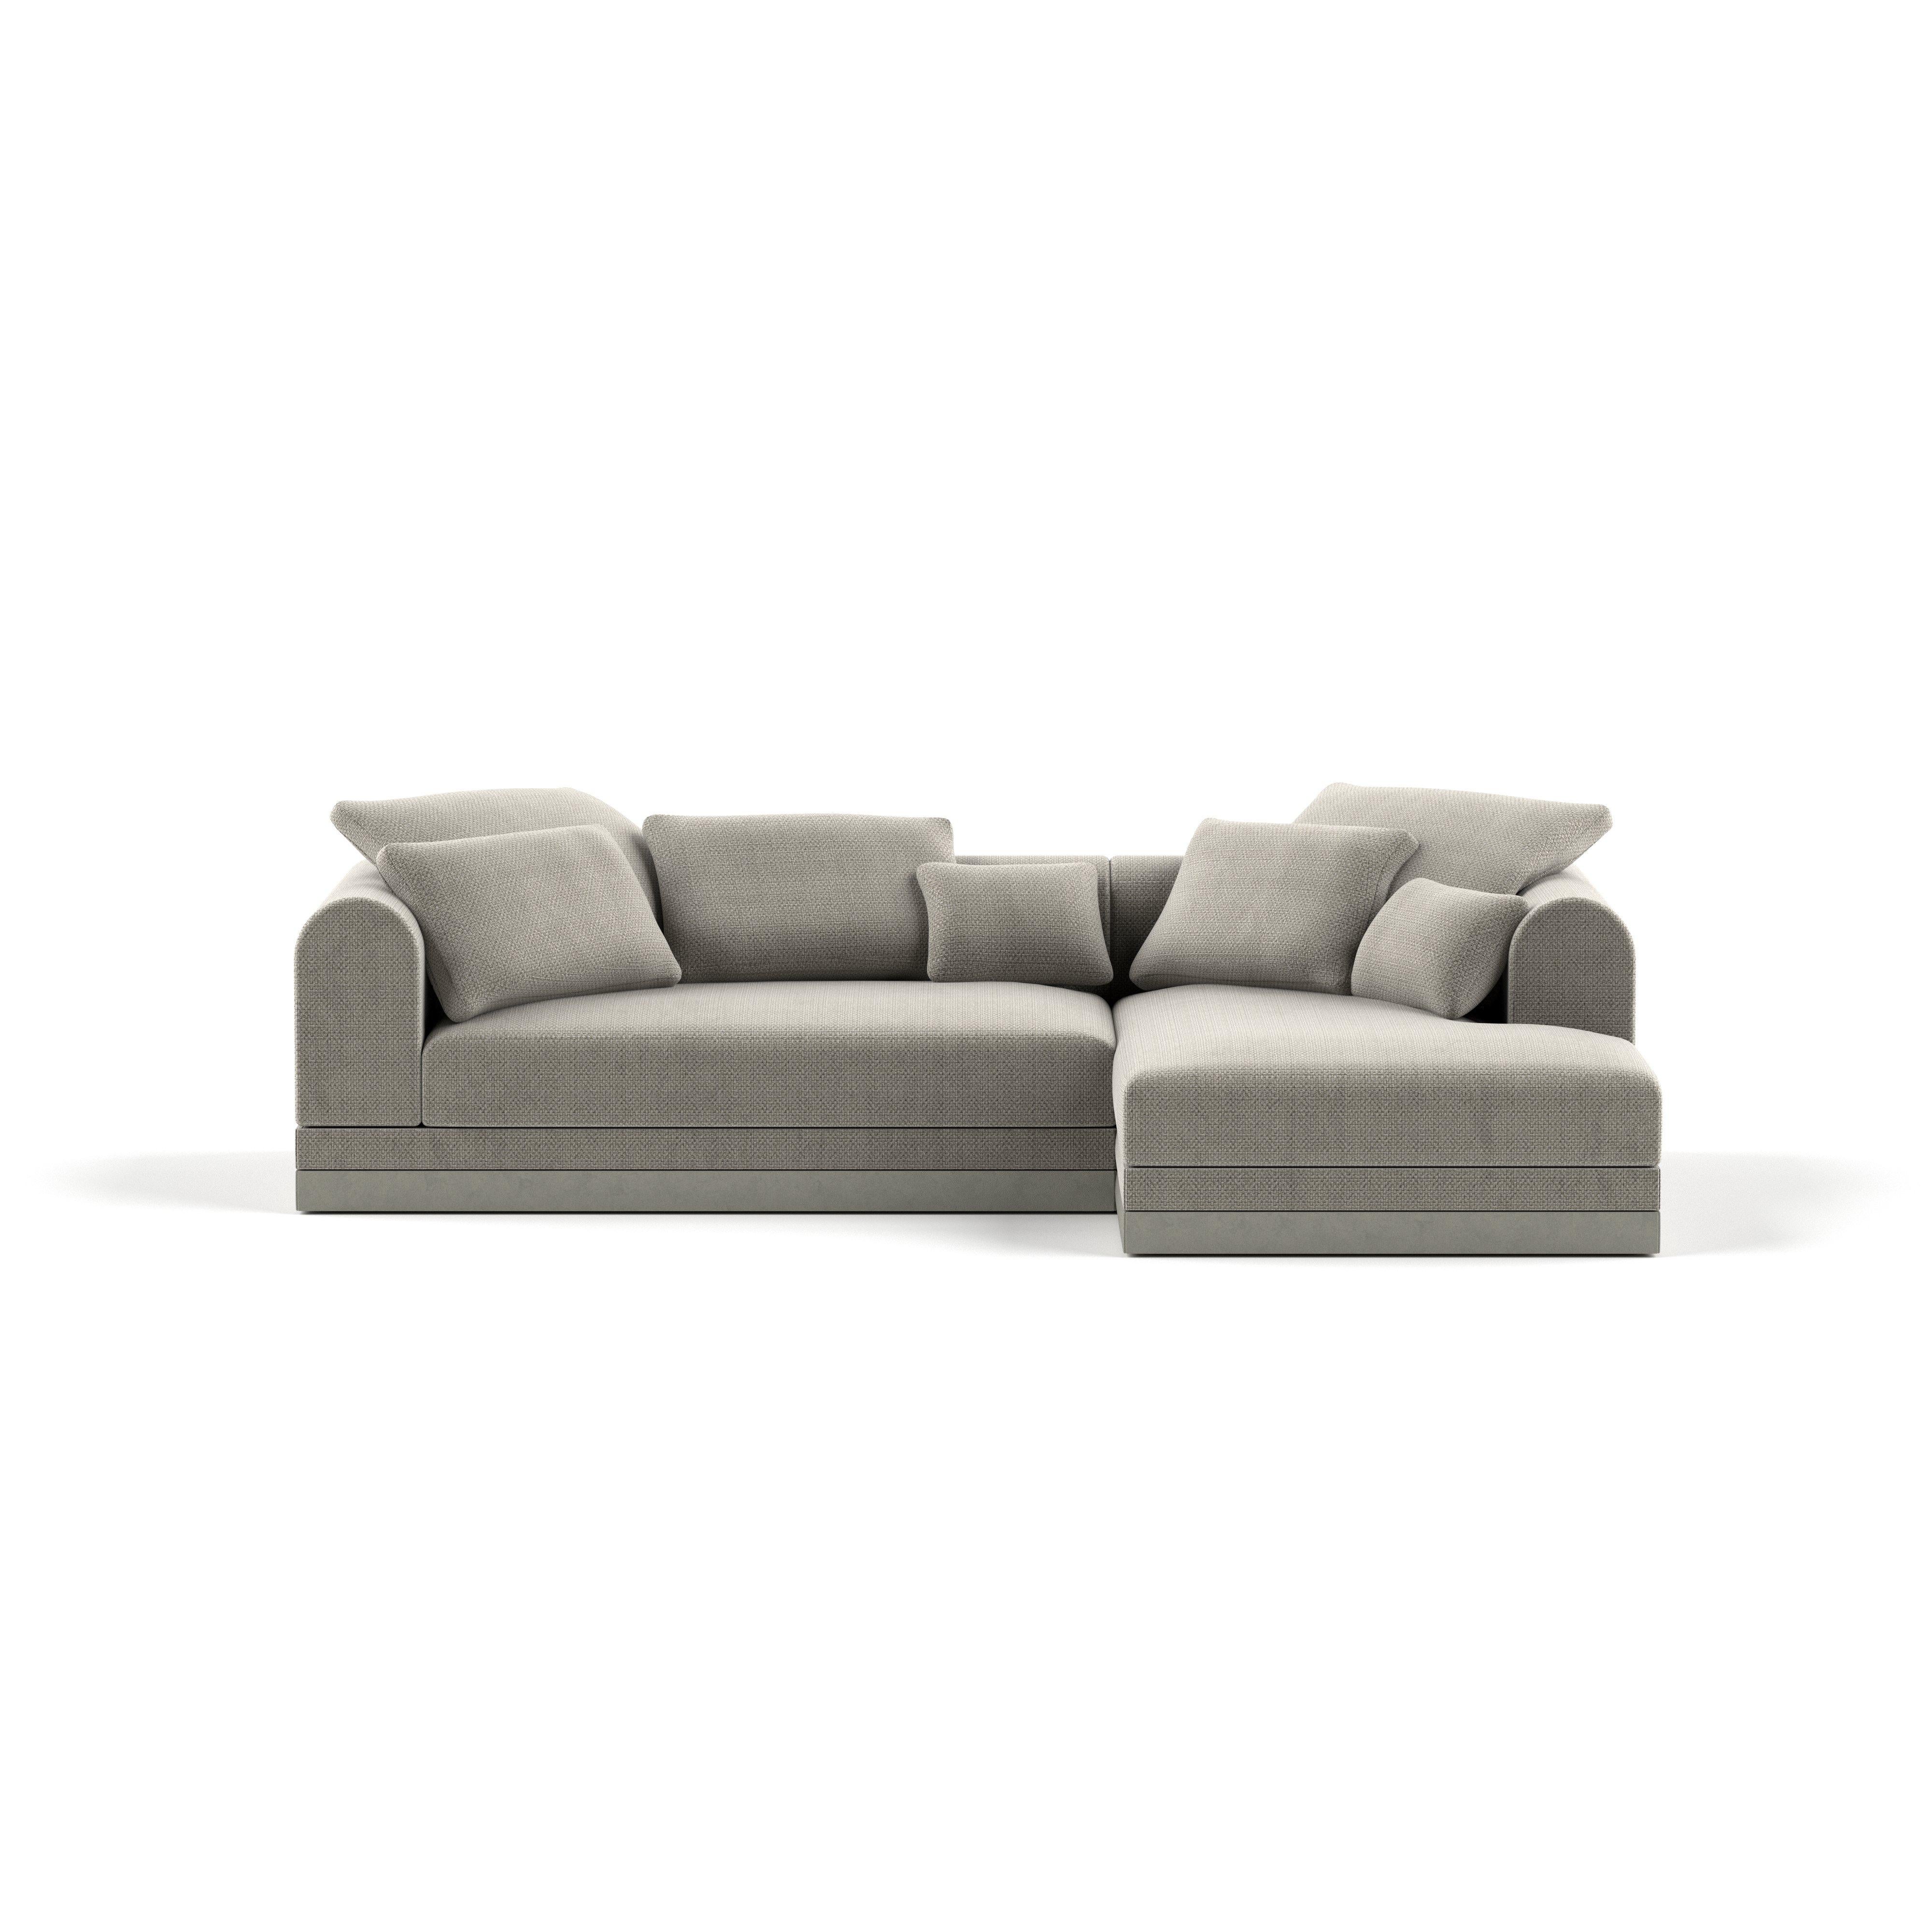 'Aqueduct' Contemporary Sofa by Poiat, Setup 1, Yang 95, High Plinth For Sale 3